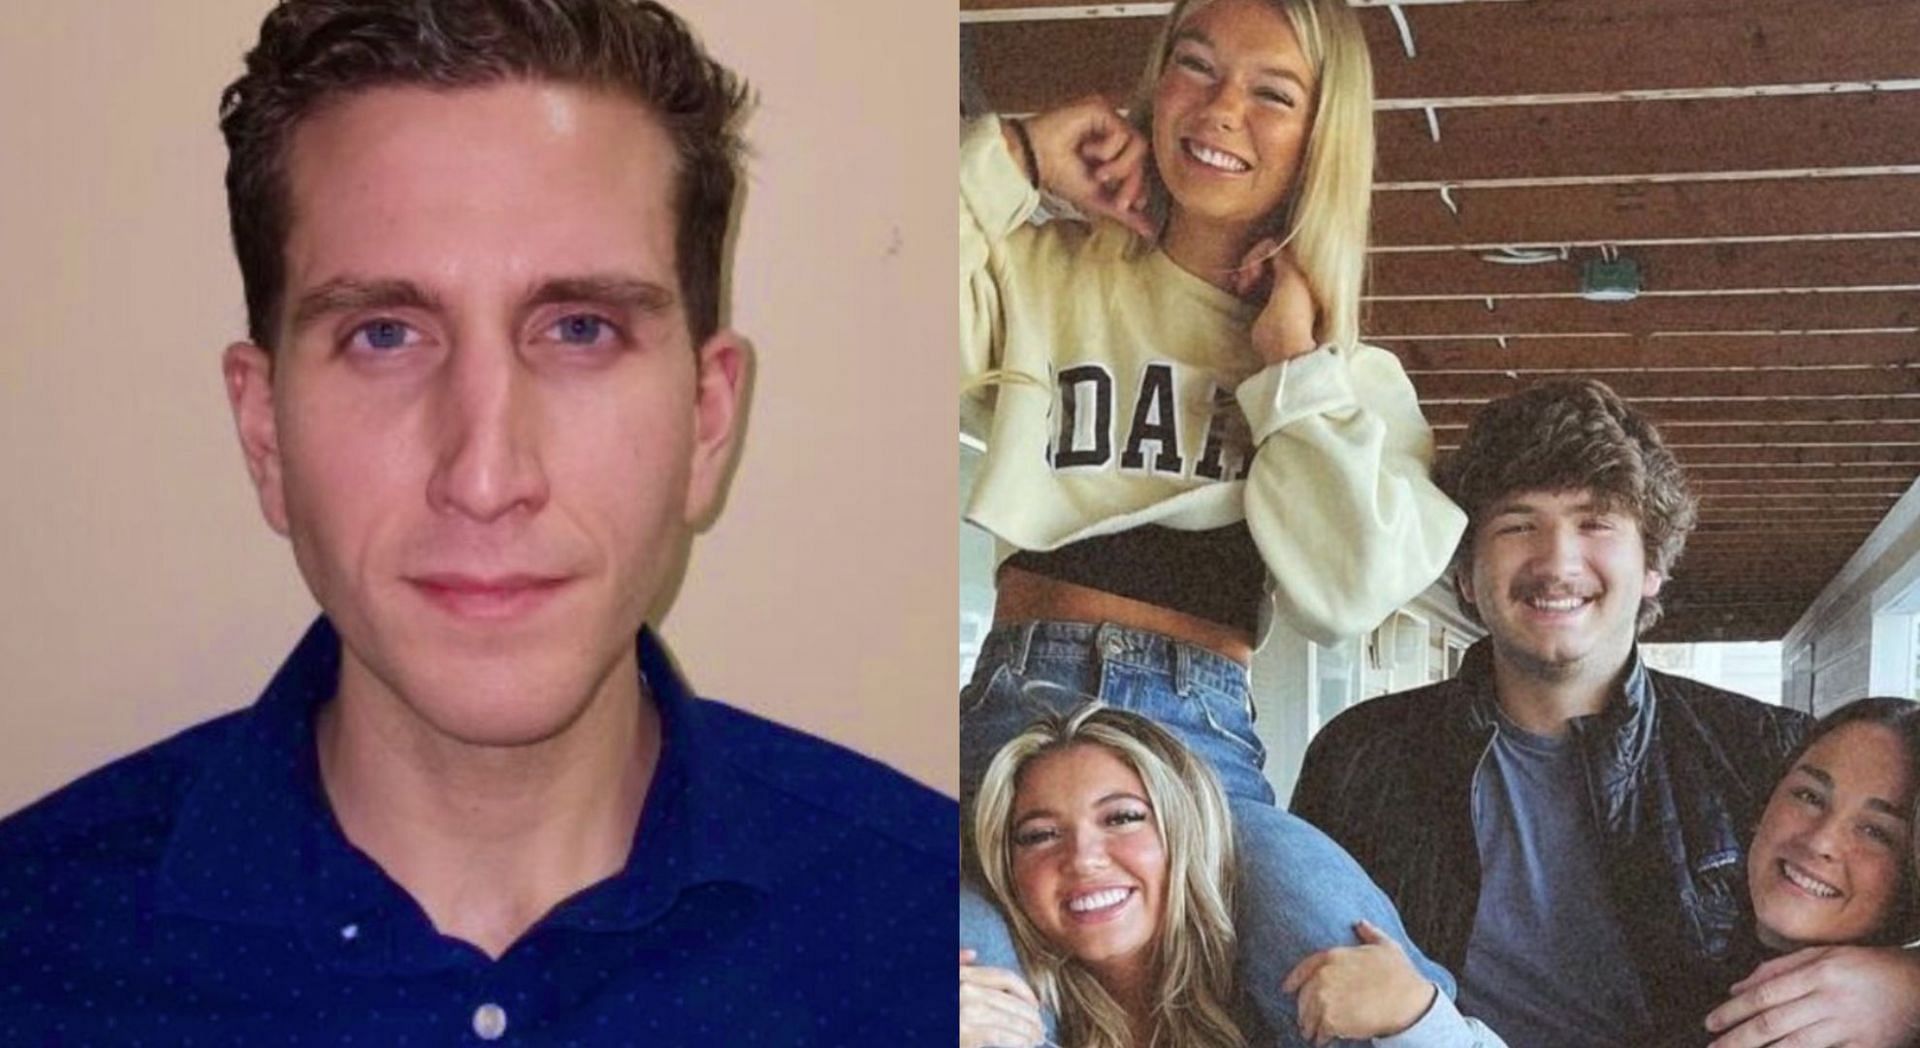 Bryan Kohberger was arrested in connection to University of Idaho student murders (Image via CrimeWithKenz/Twitter and LDBlondePod/Twitter)